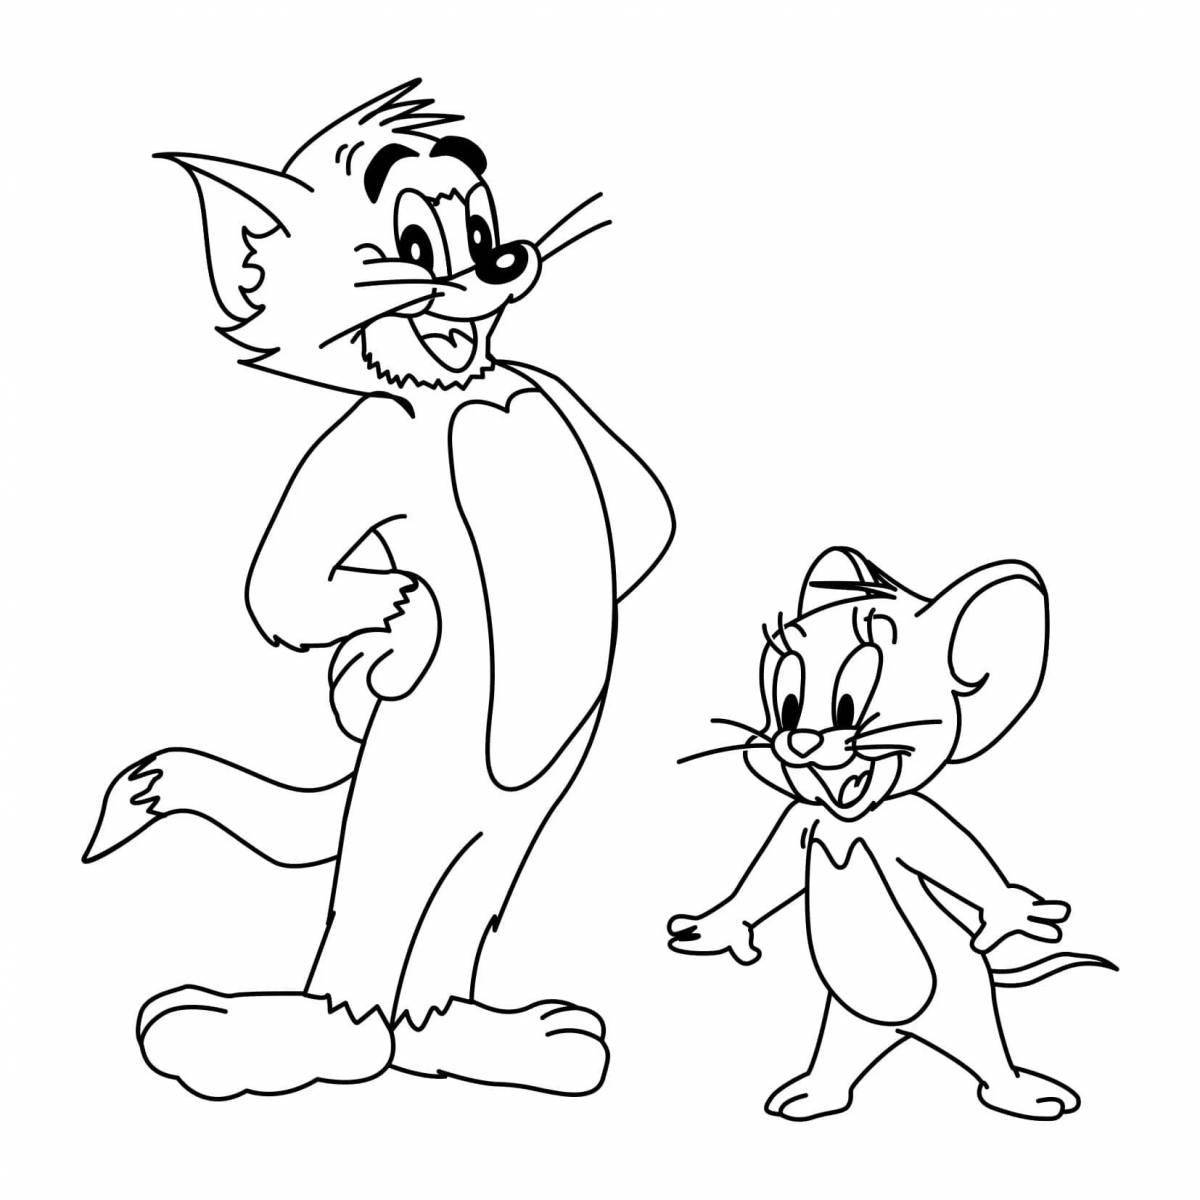 Bright coloring tom and jerry